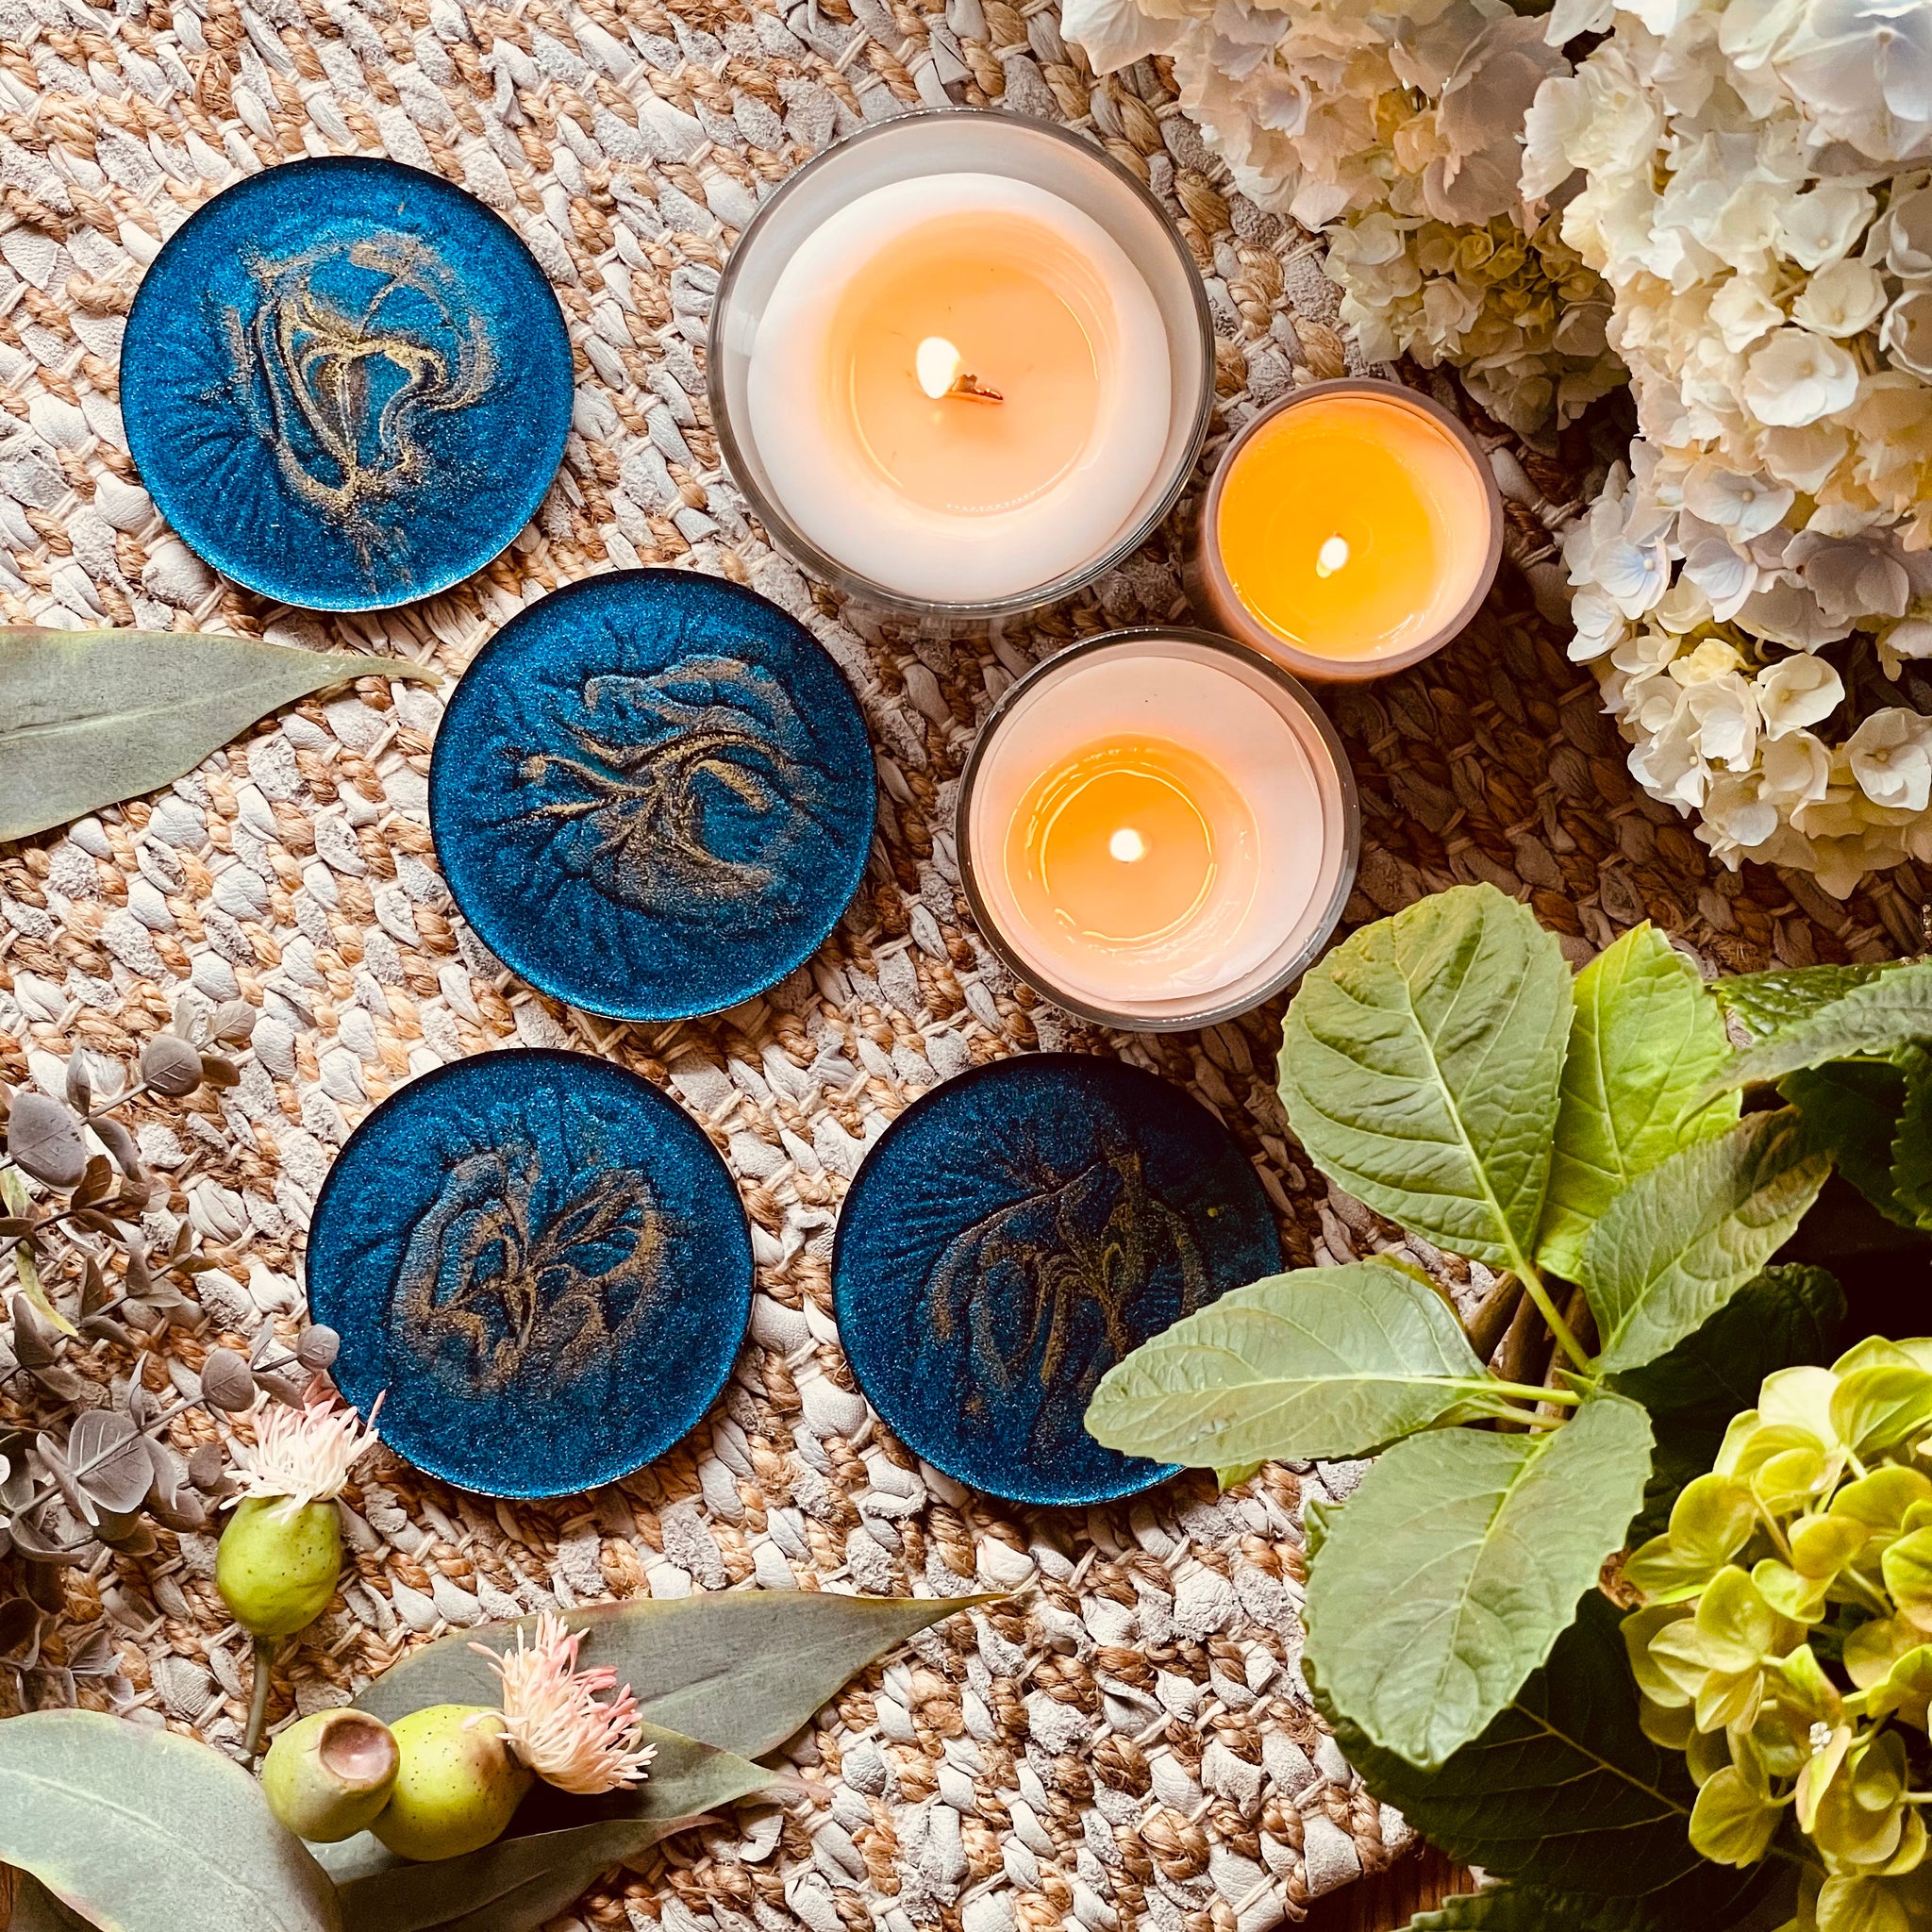 4 resin coasters in blue with gold